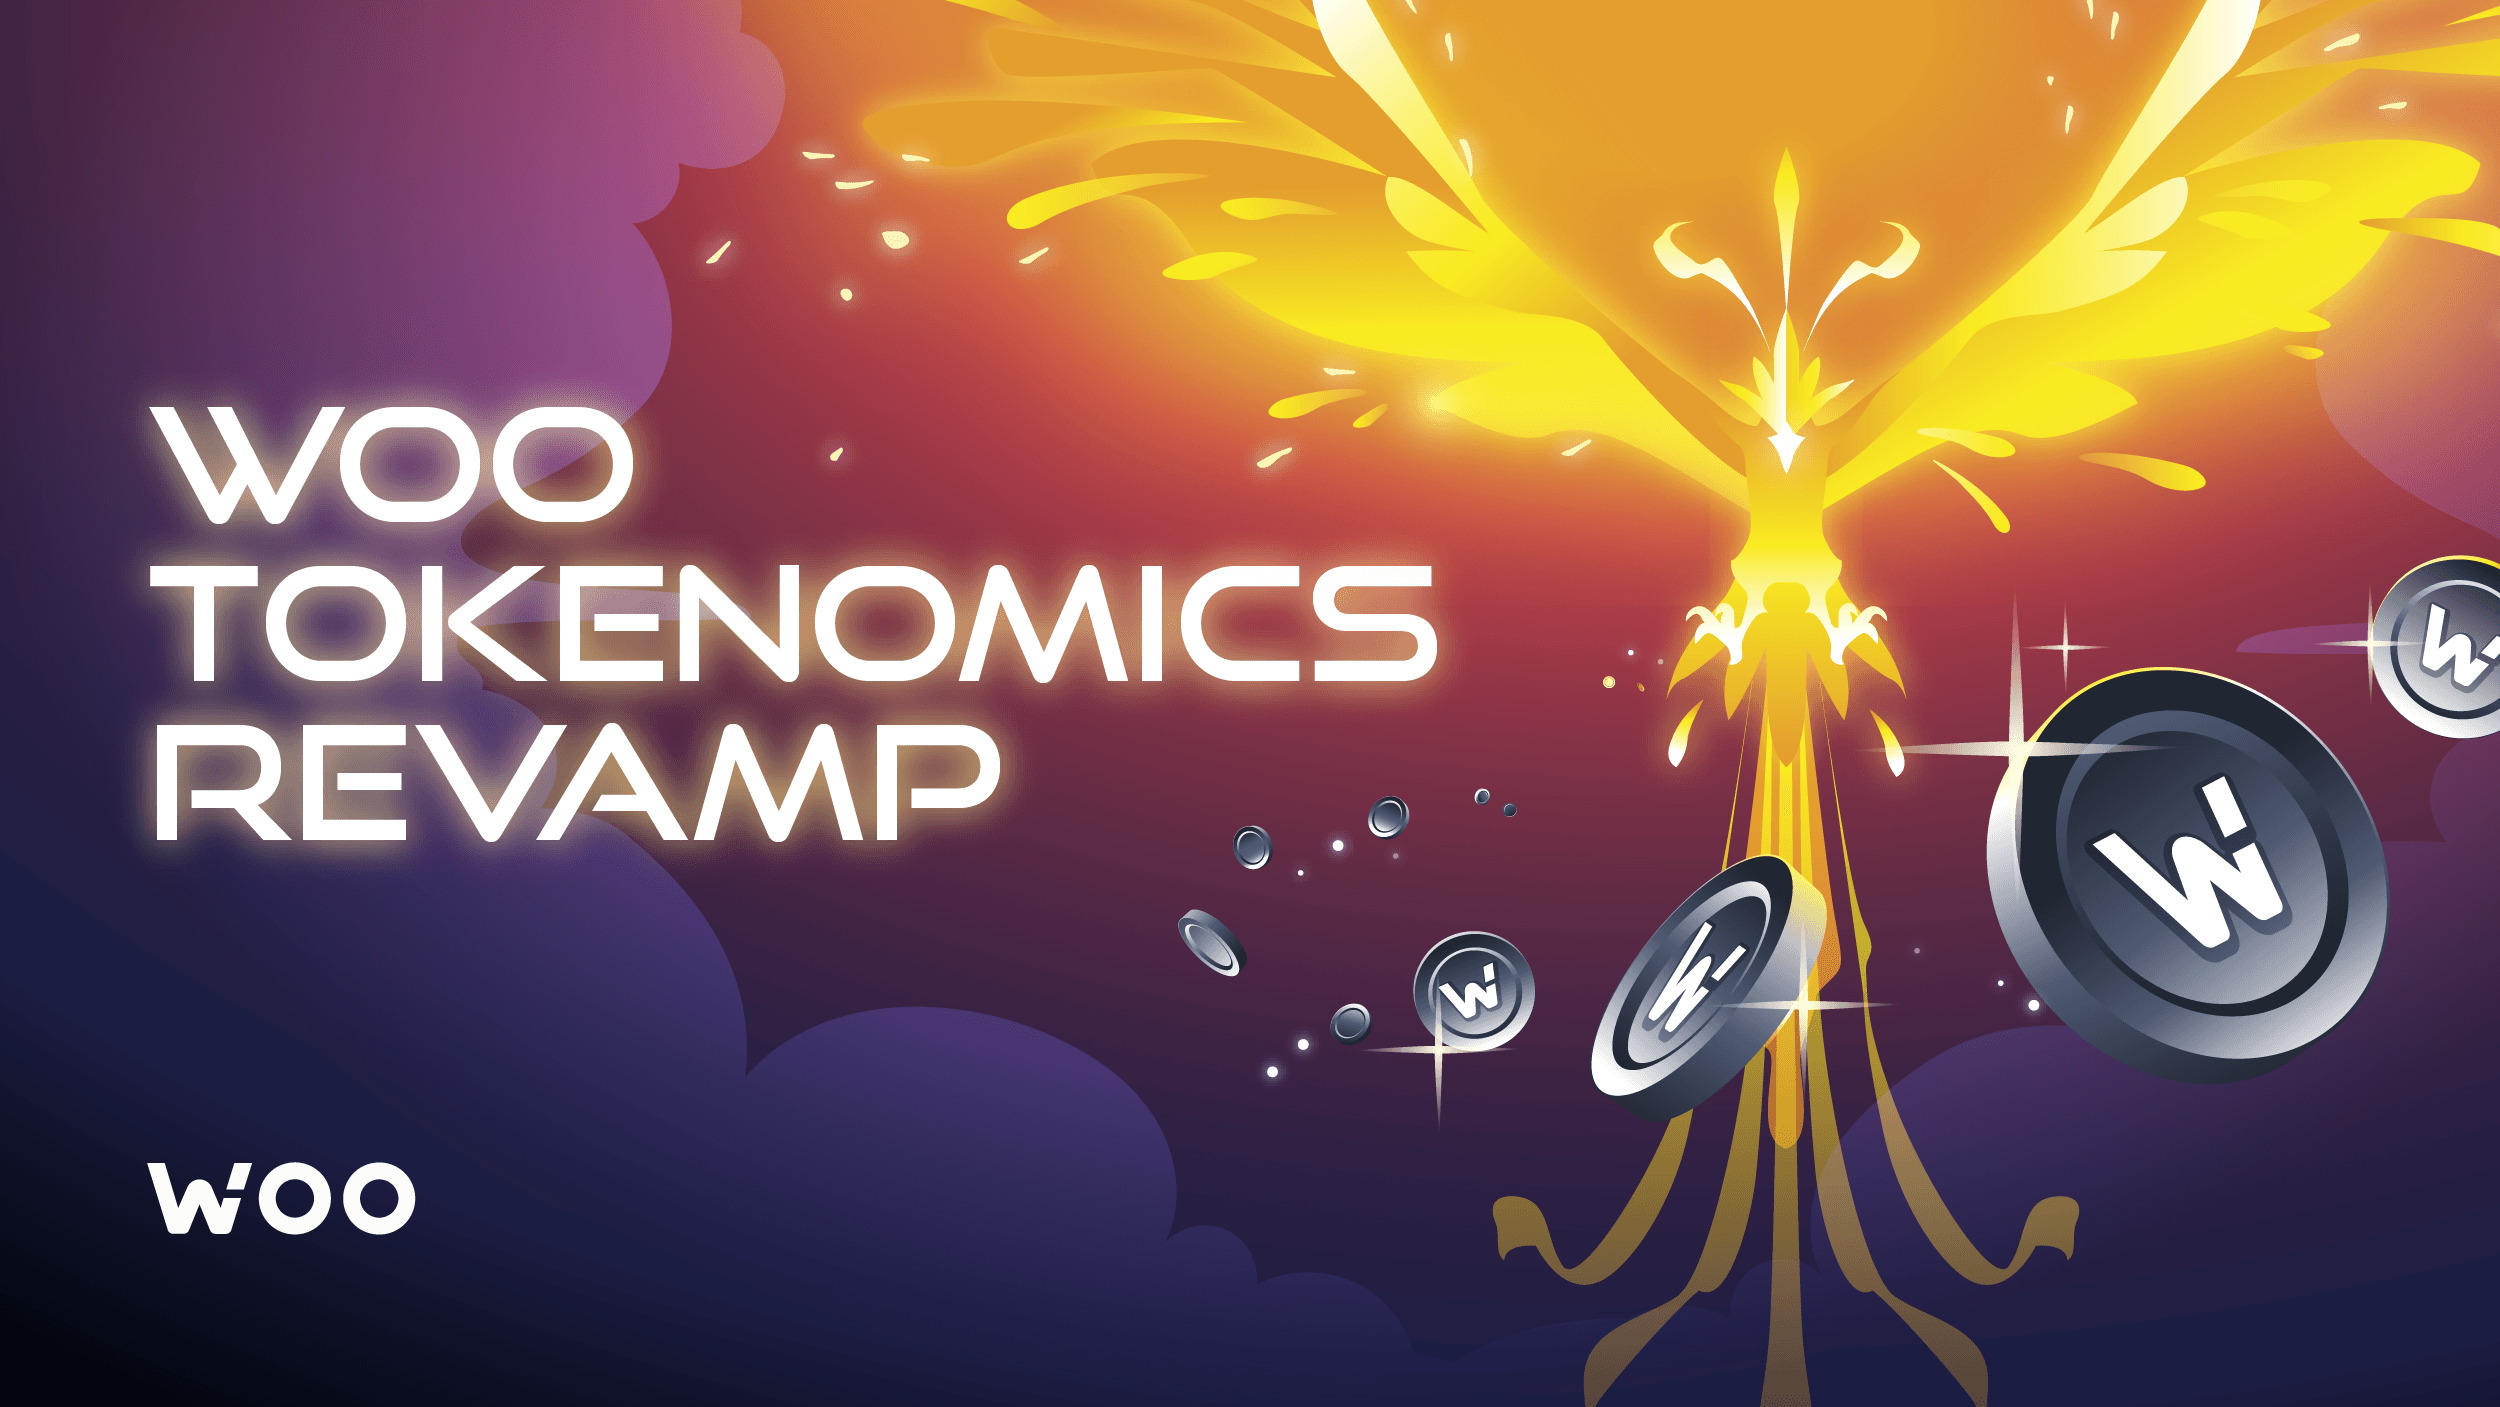 WOO tokenomics revamp: The first chapter